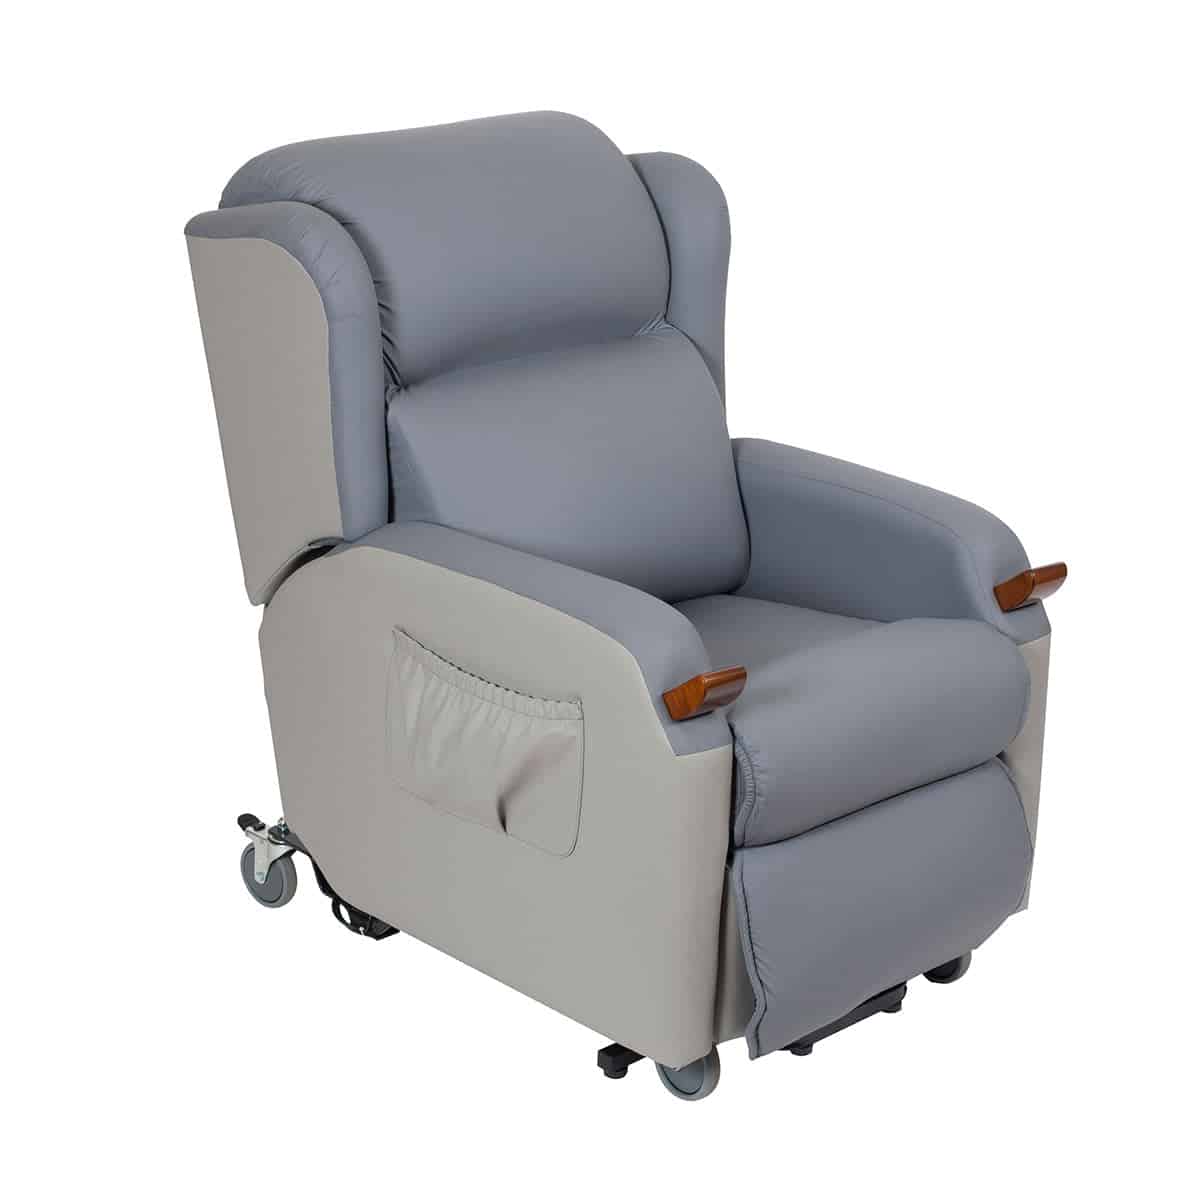 Air Comfort Mobile Compact Lift Chair (Carrflex) – Single or Twin Motor